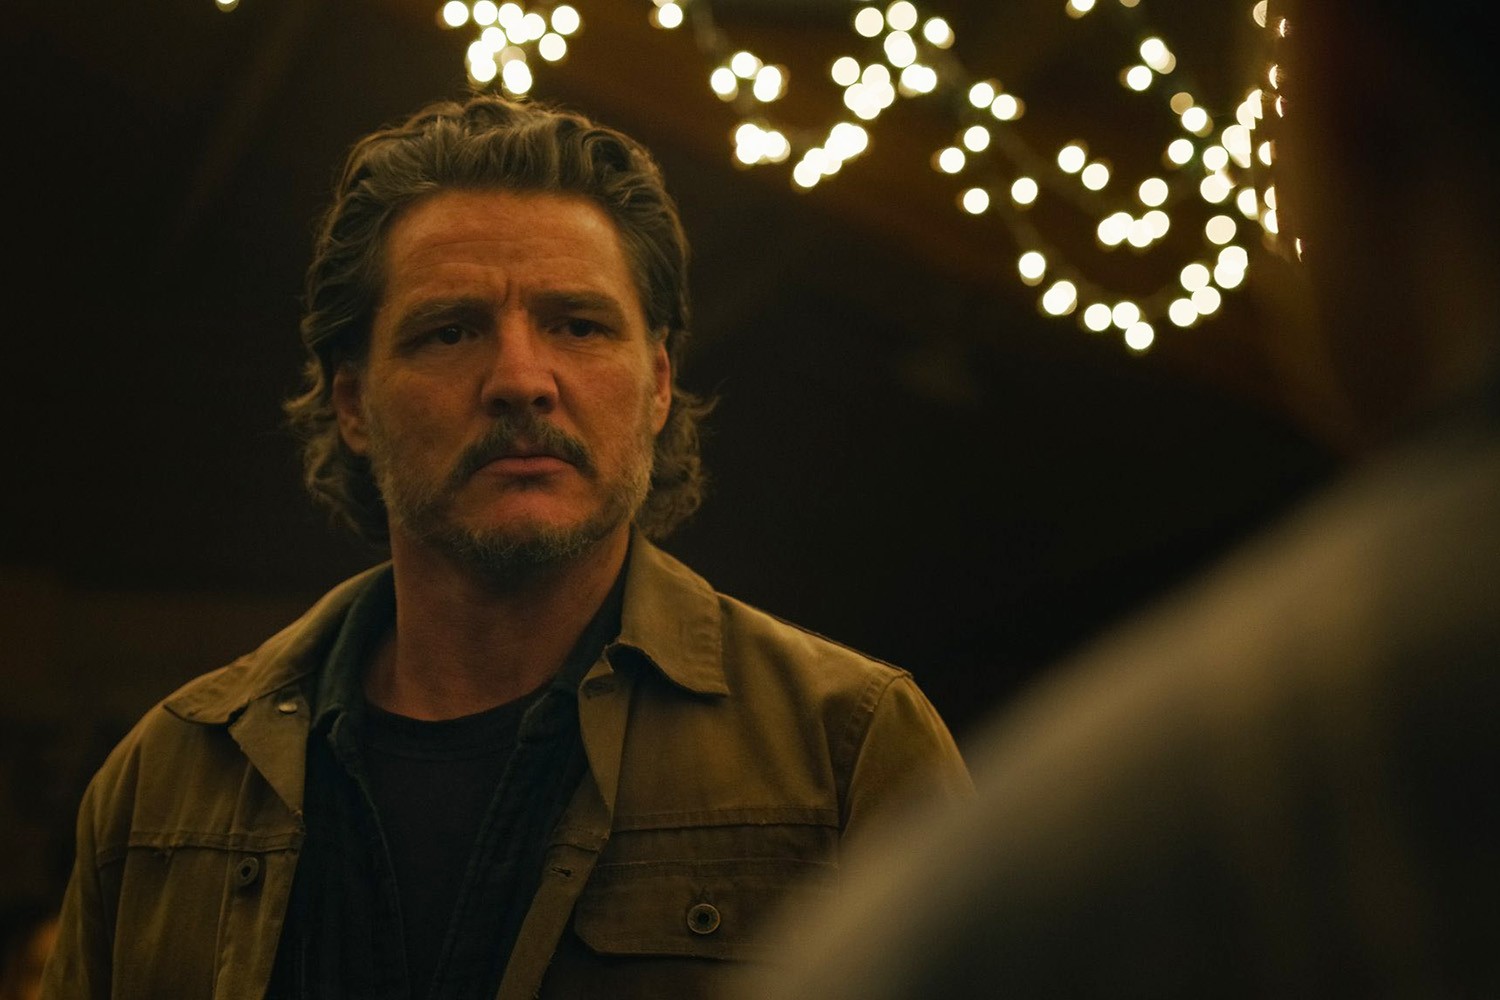 Joel (Pedro Pascal) in The Last of Us season 2, standing in a dimly lit area with fairy lights in the top right-hand corner